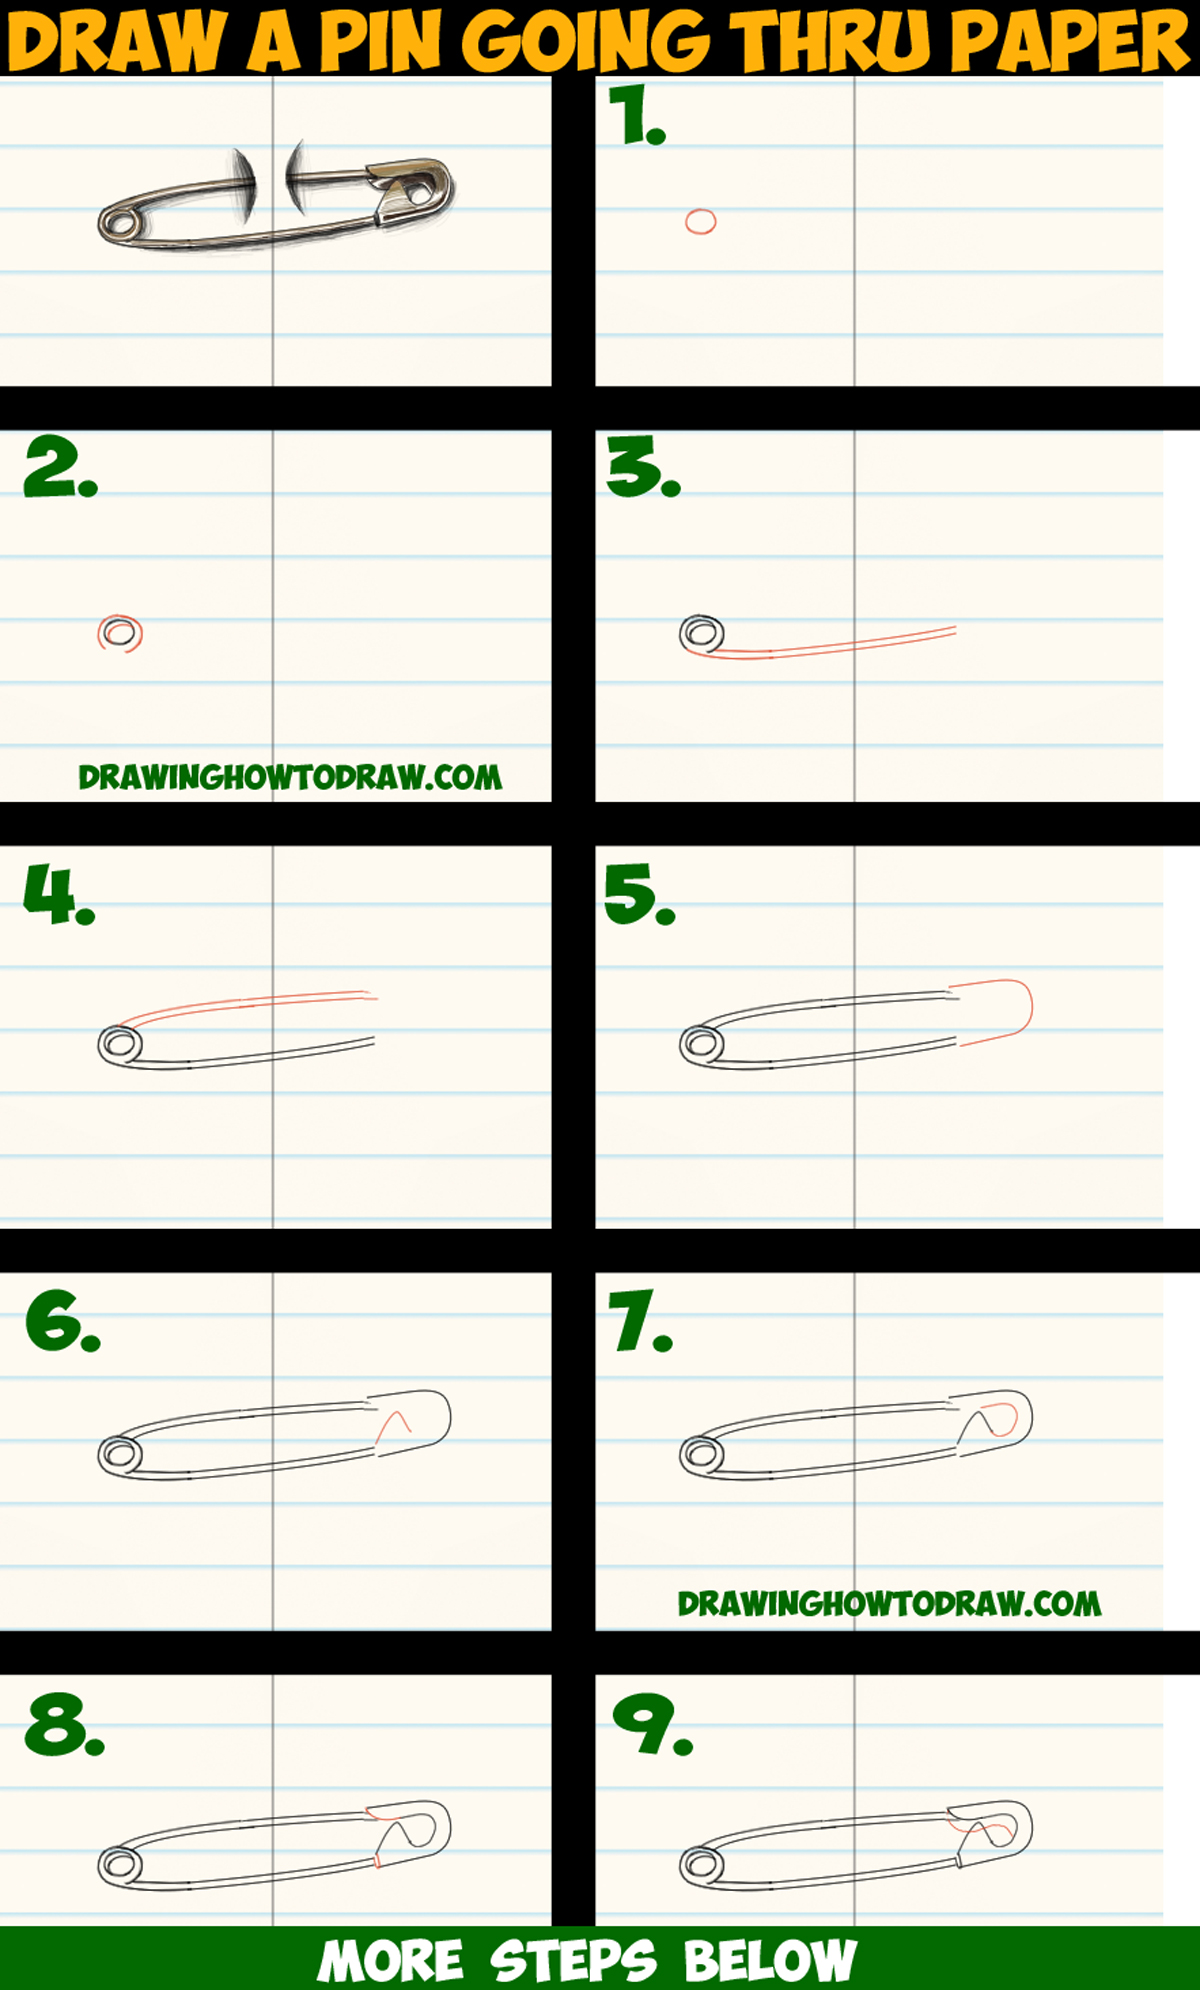 How to Draw Cool Stuff – Draw a Safety Pin Holding 2 Pieces of